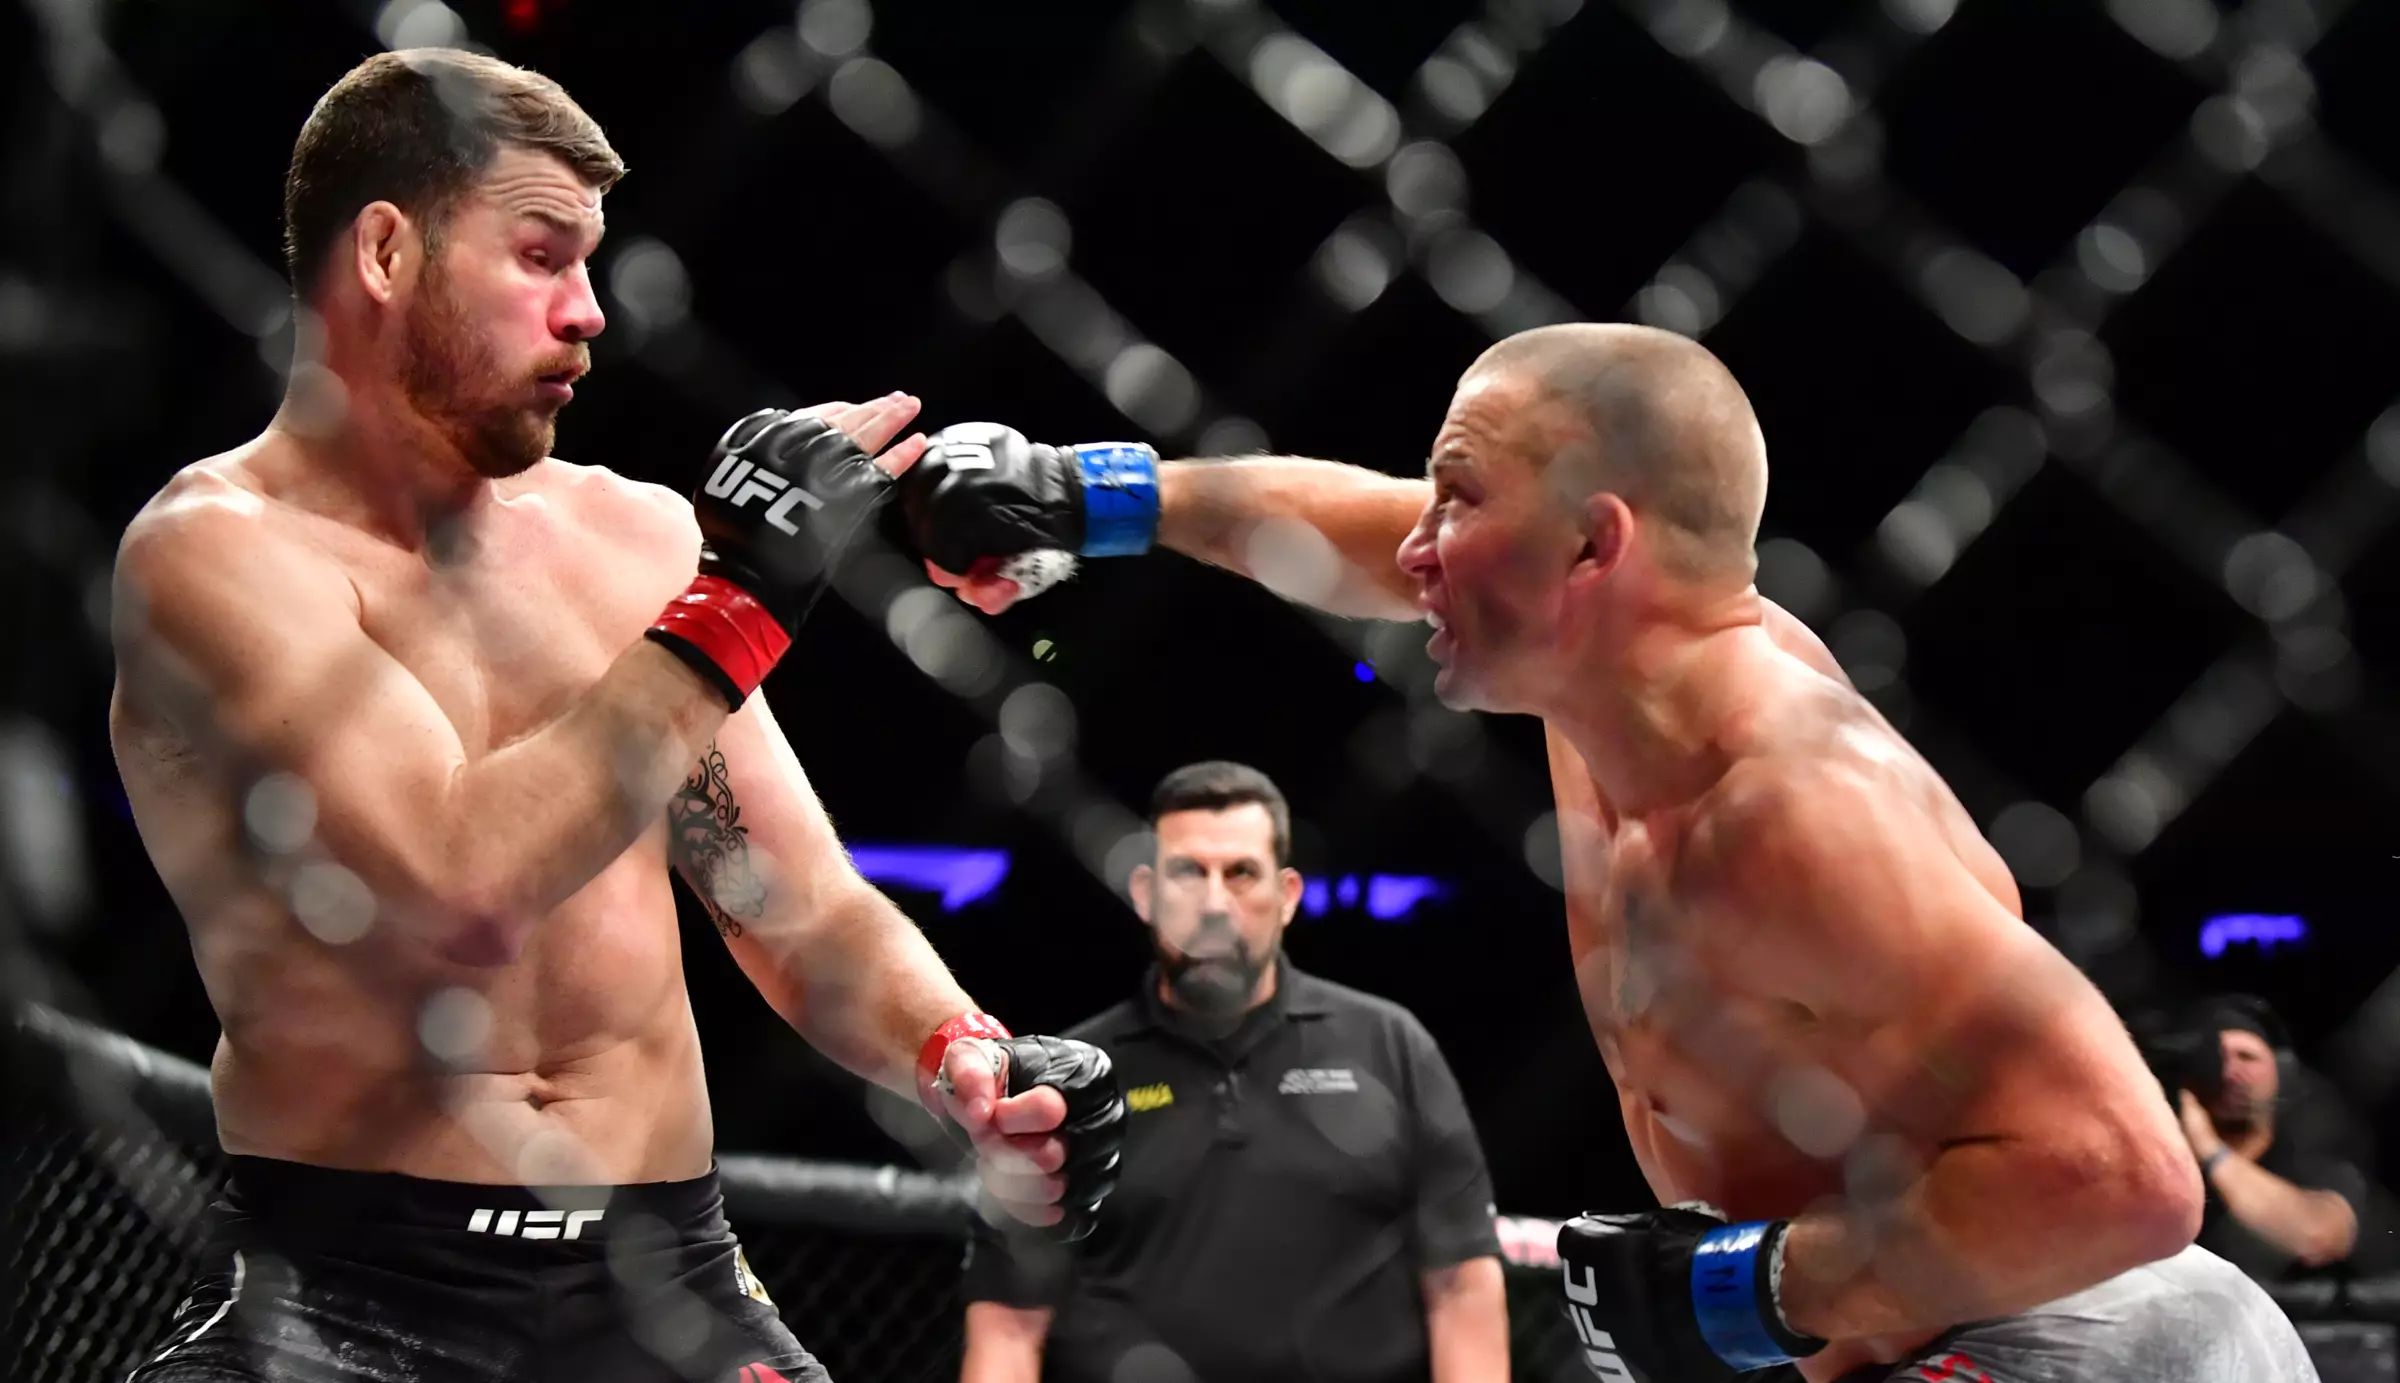 Michael Bisping (in red) up against George St-Pierre in 2017.